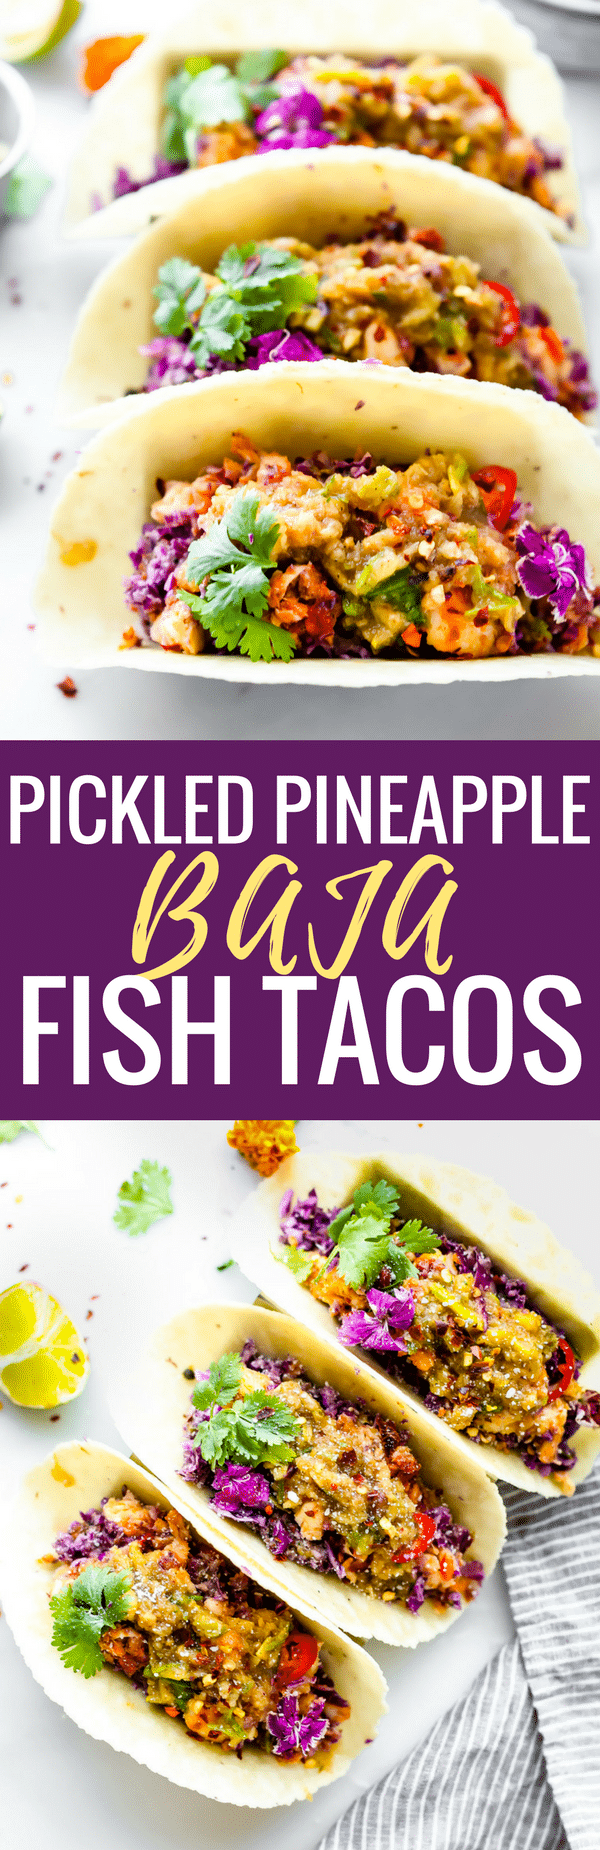 These Pickled Pineapple Baja Fish Tacos are my latest love! Easy to make with homemade pickled pineapple relish, cabbage slaw with avocado cream, and Baja style fried fish all wrapped in a warm gluten free tortilla! So much flavor but also SO simple and healthy to make. www.cottercrunch.com Paleo friendly options.